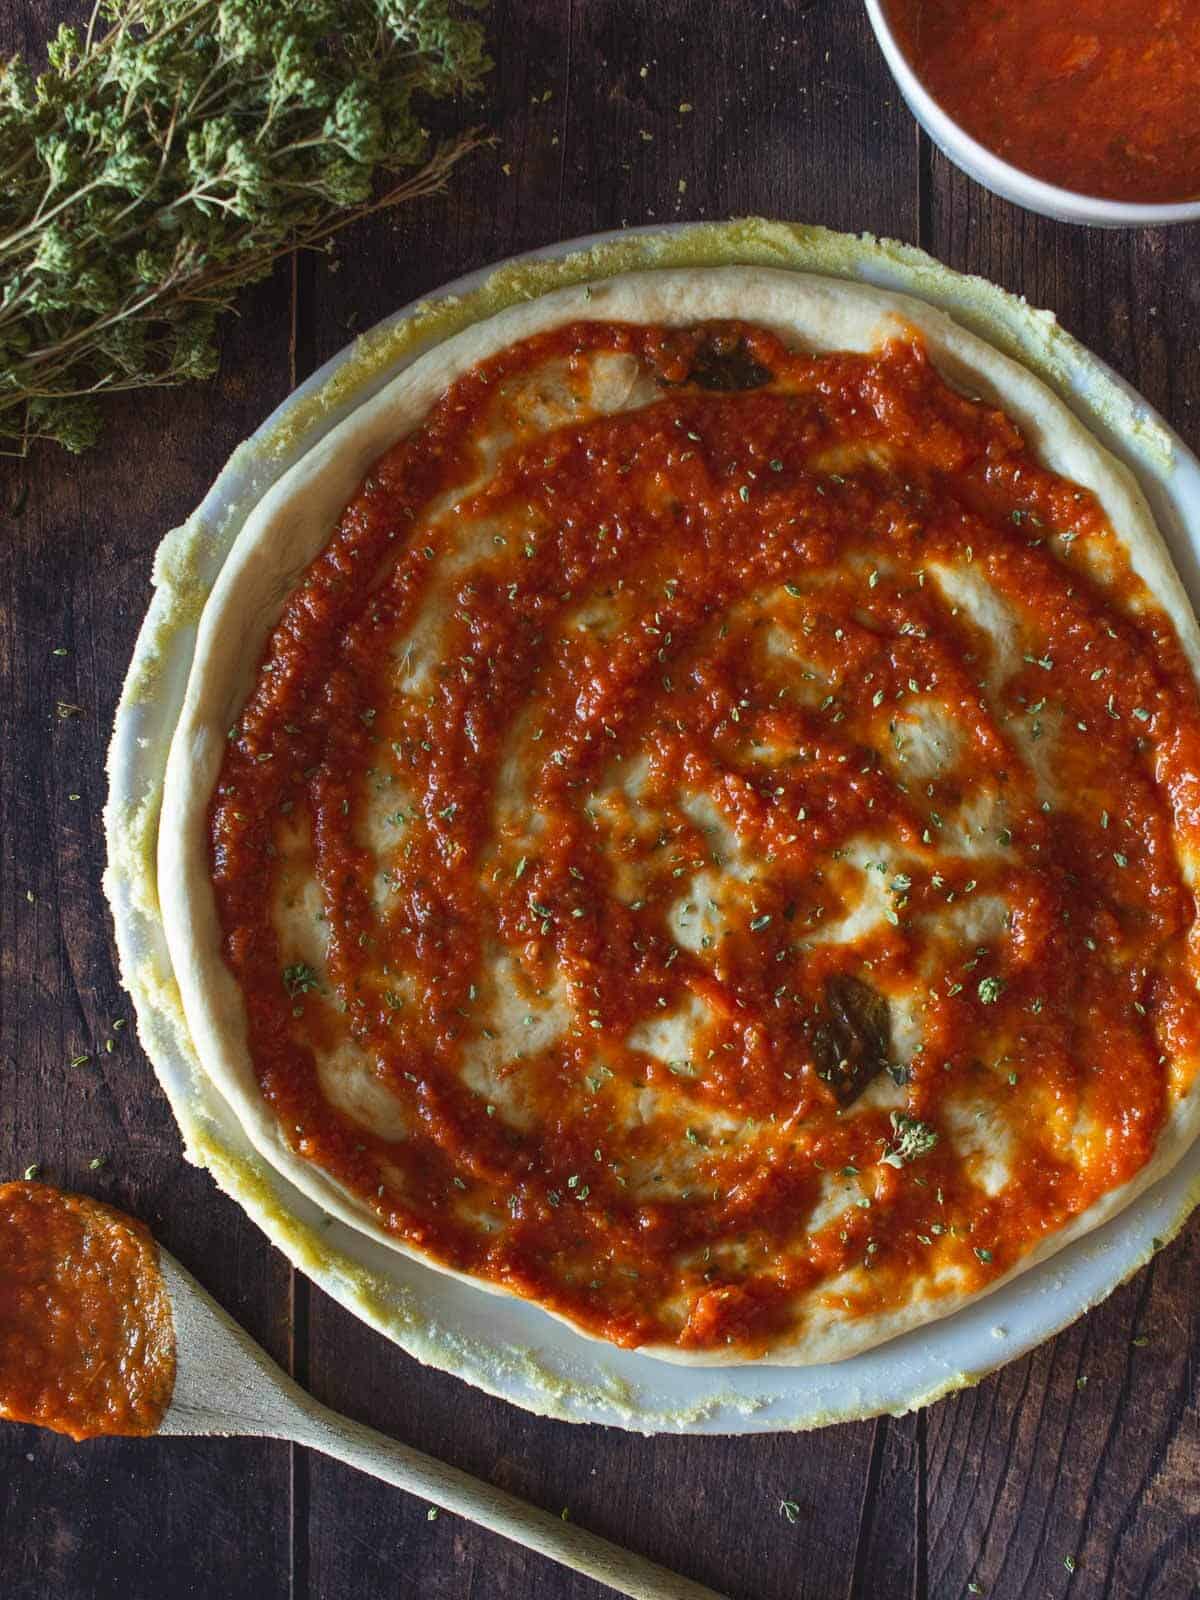 extended vegan pizza dough with tomato sauce.